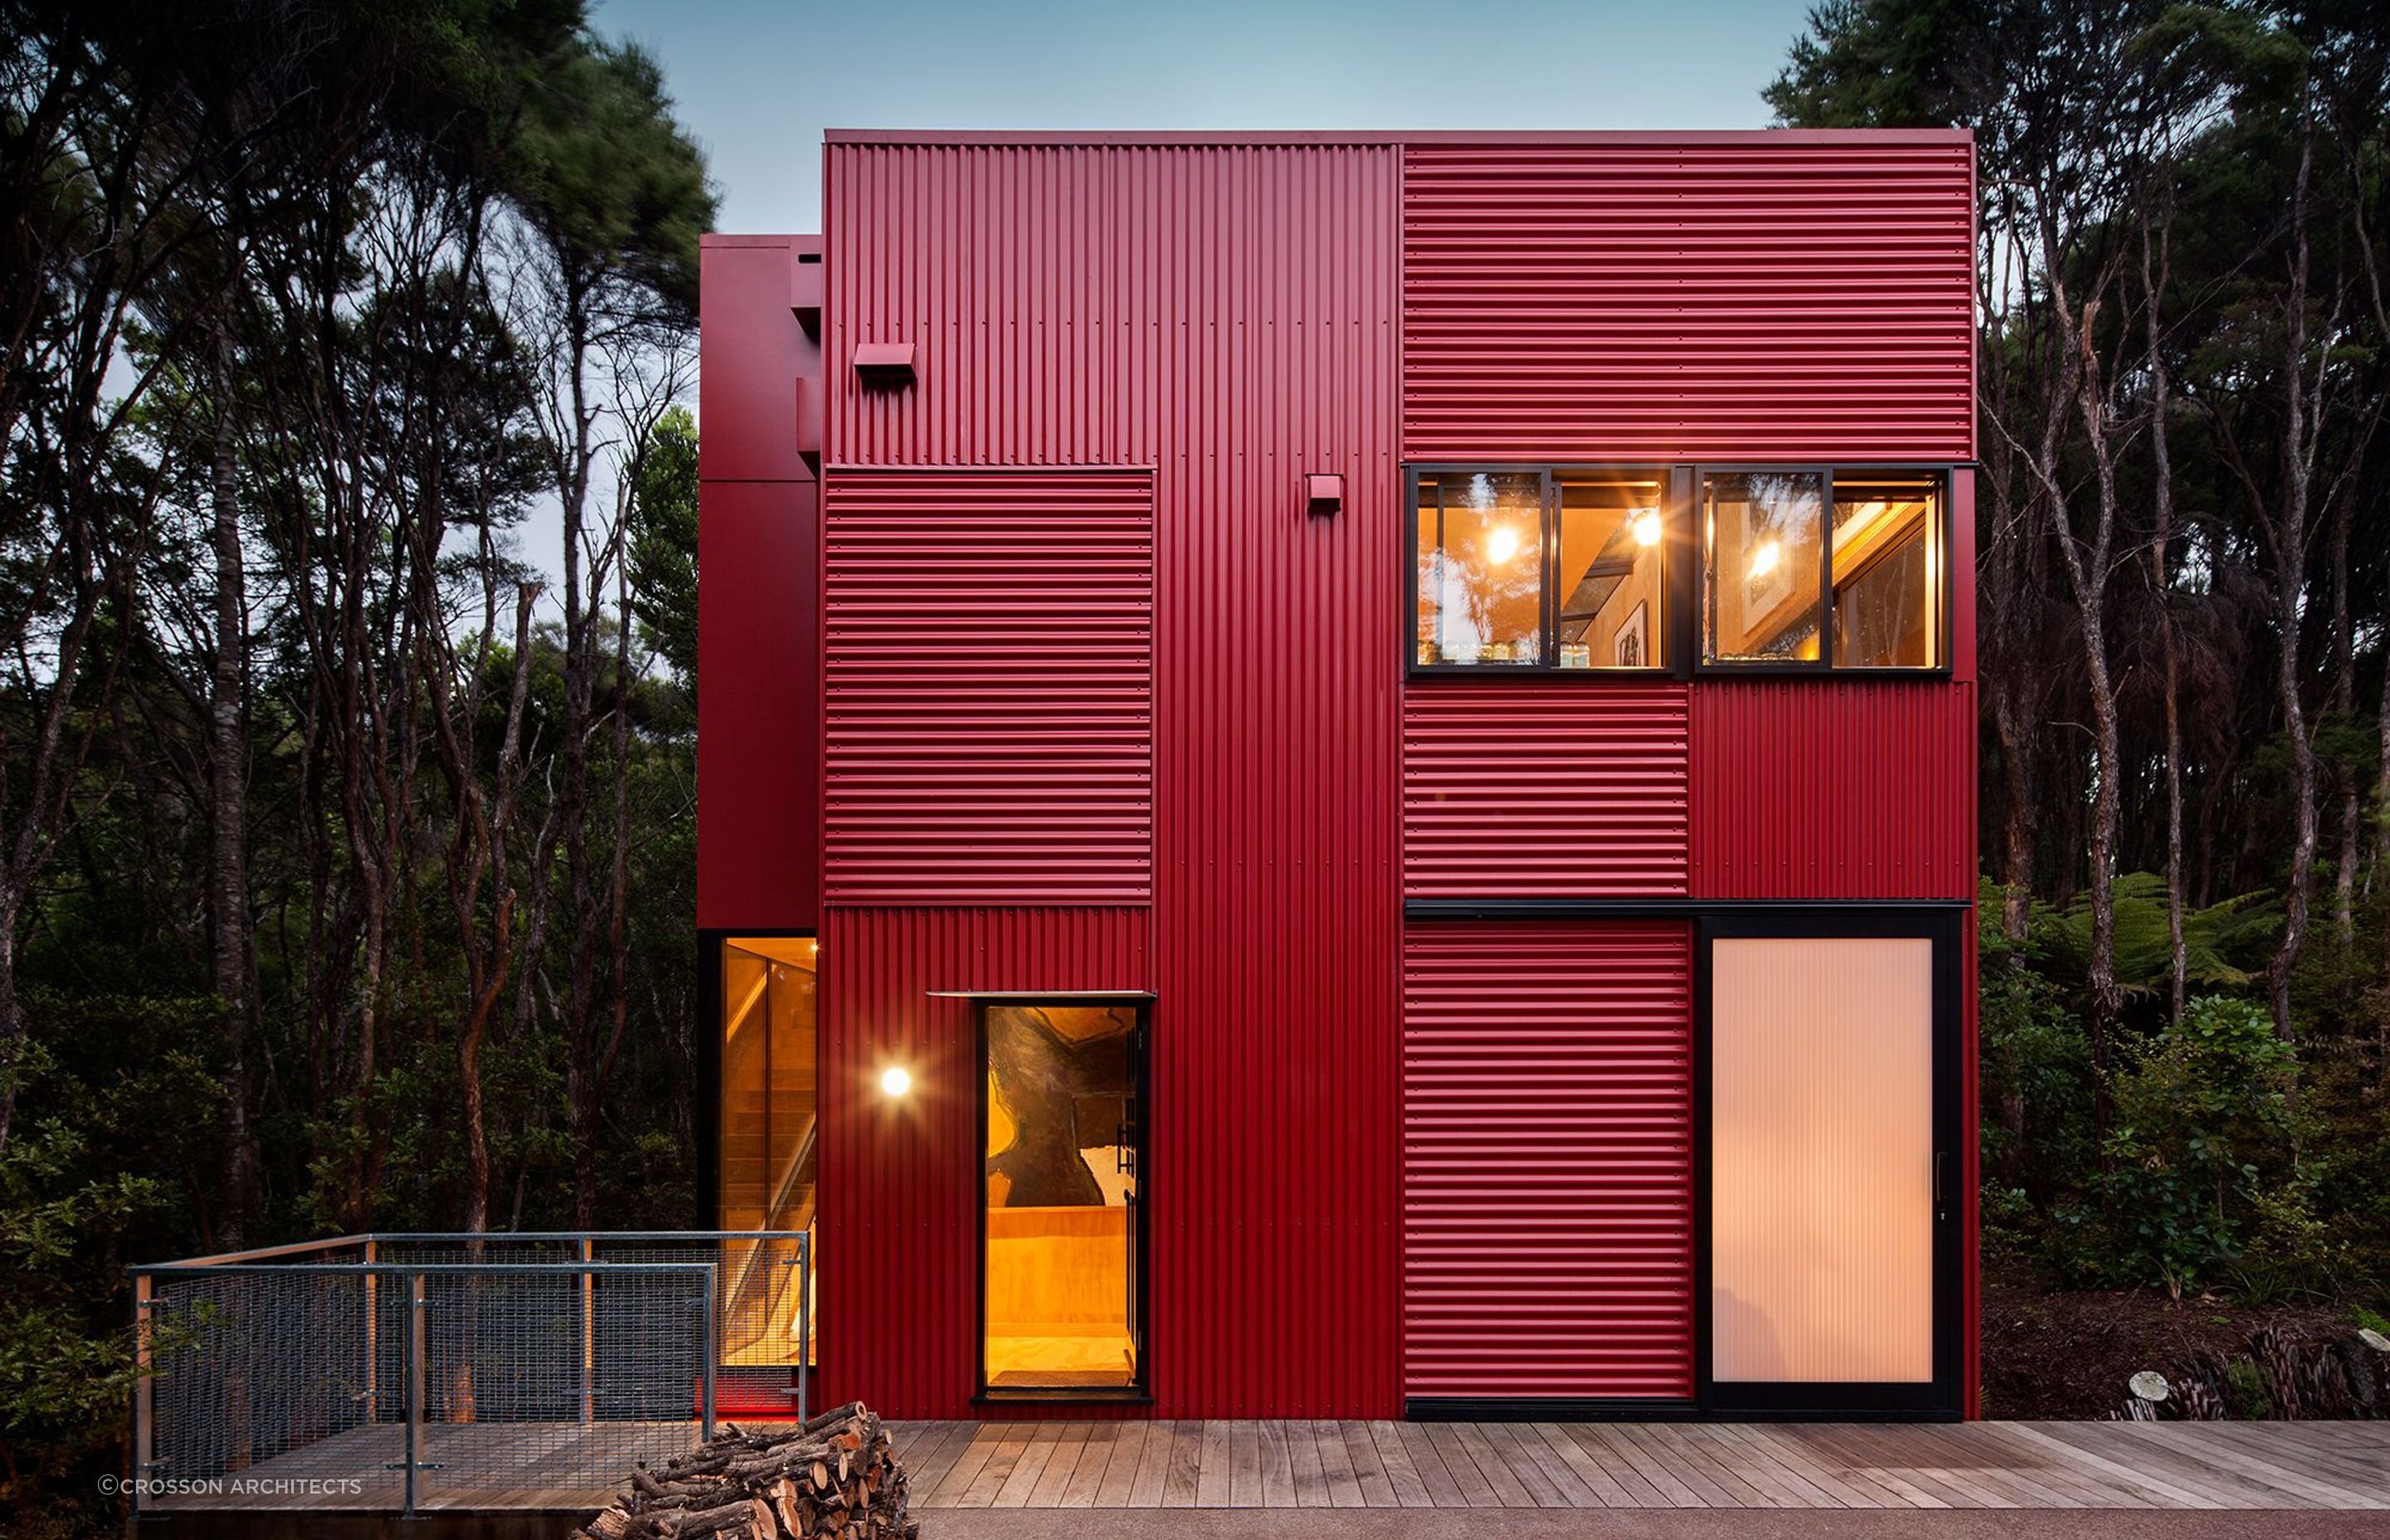 Red-painted corrugated iron makes this house pop in it’s green bush surroundings.